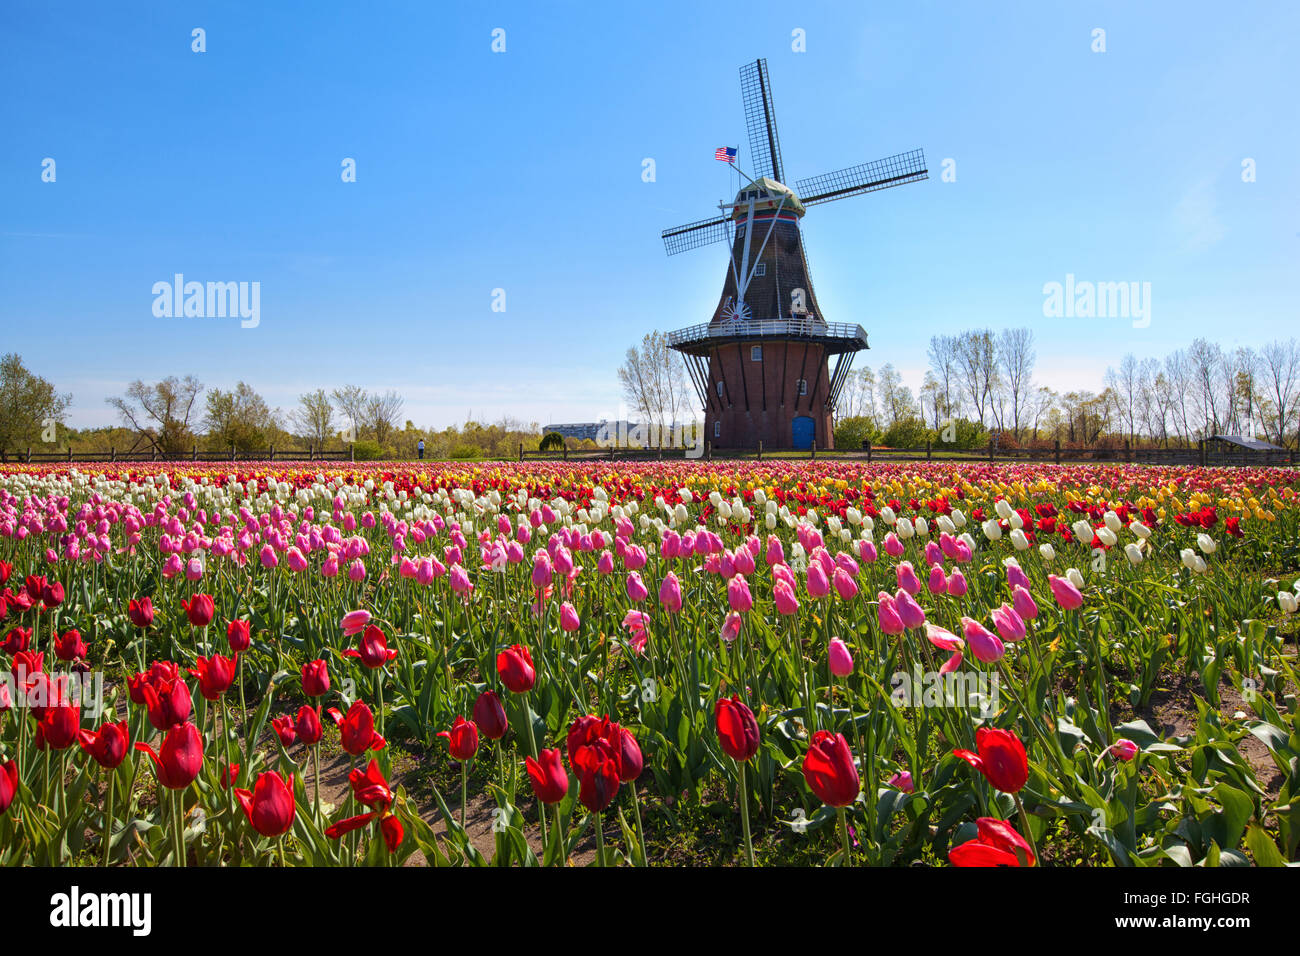 An authentic wooden windmill from the Netherlands rises behind a field of tulips in Holland Michigan at Springtime. Stock Photo